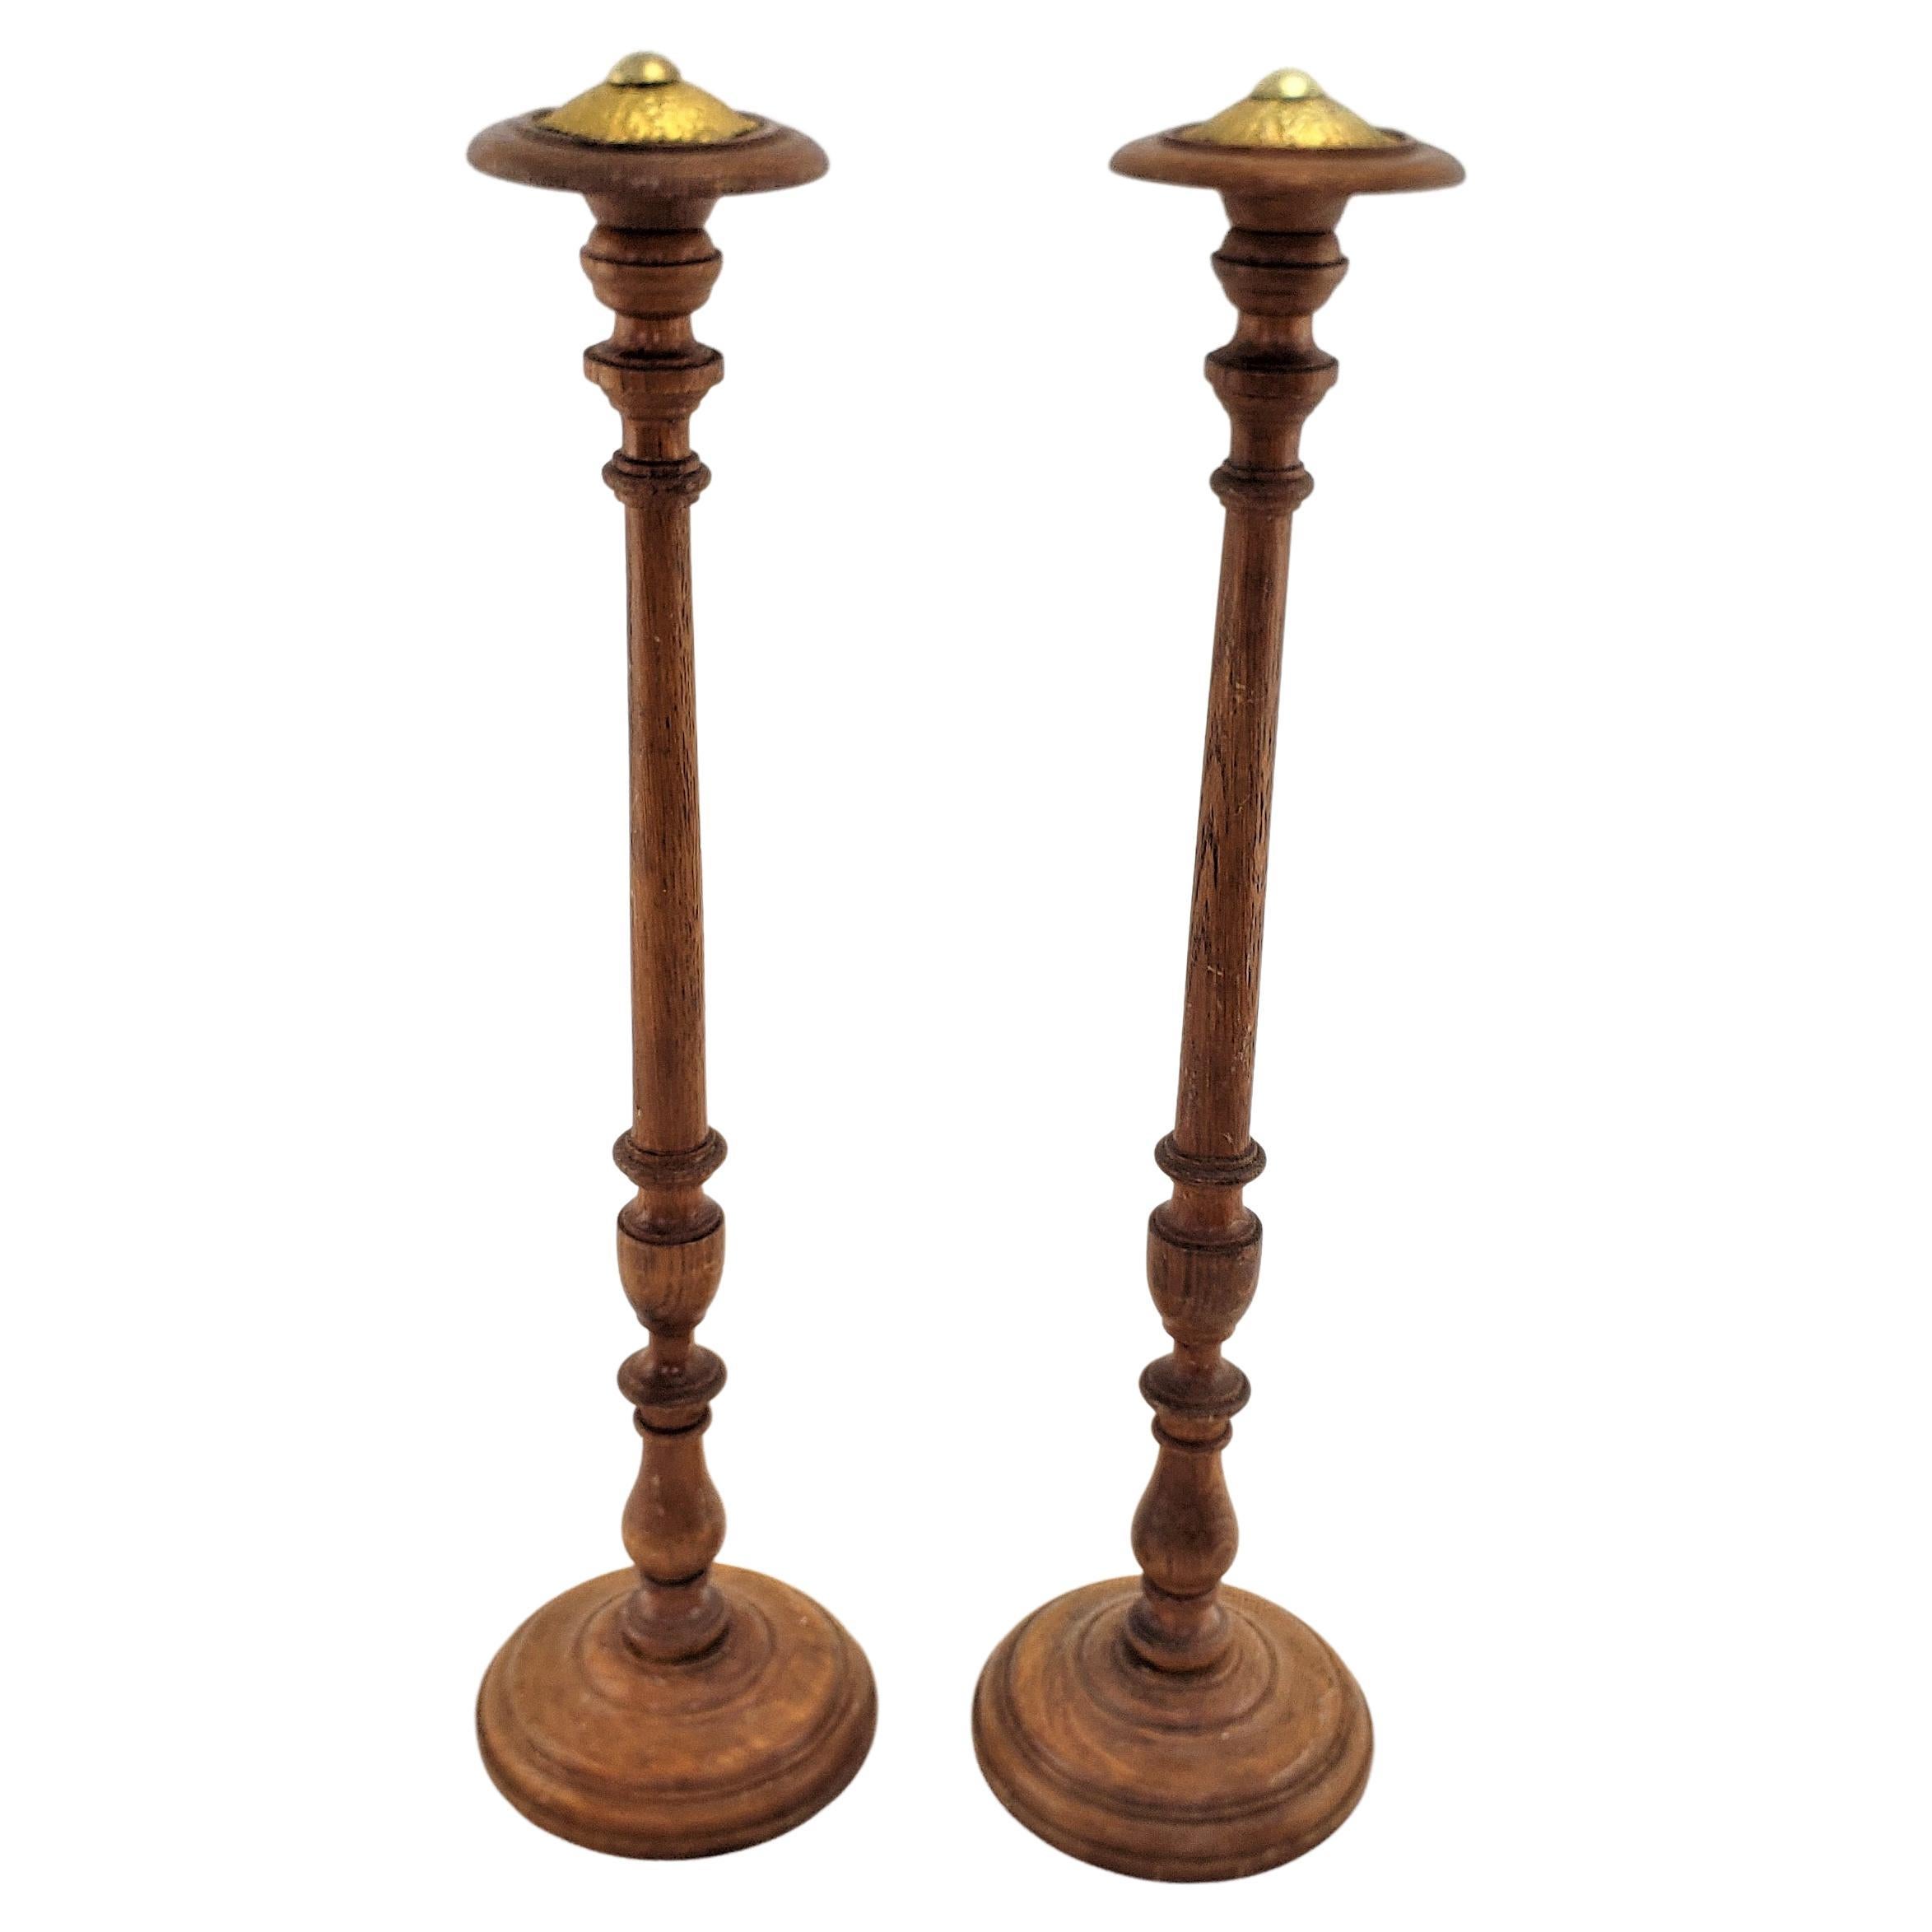 Pair of Antique English Turned Oak Mercantile Hat Stands w/ Engraved Brass Caps